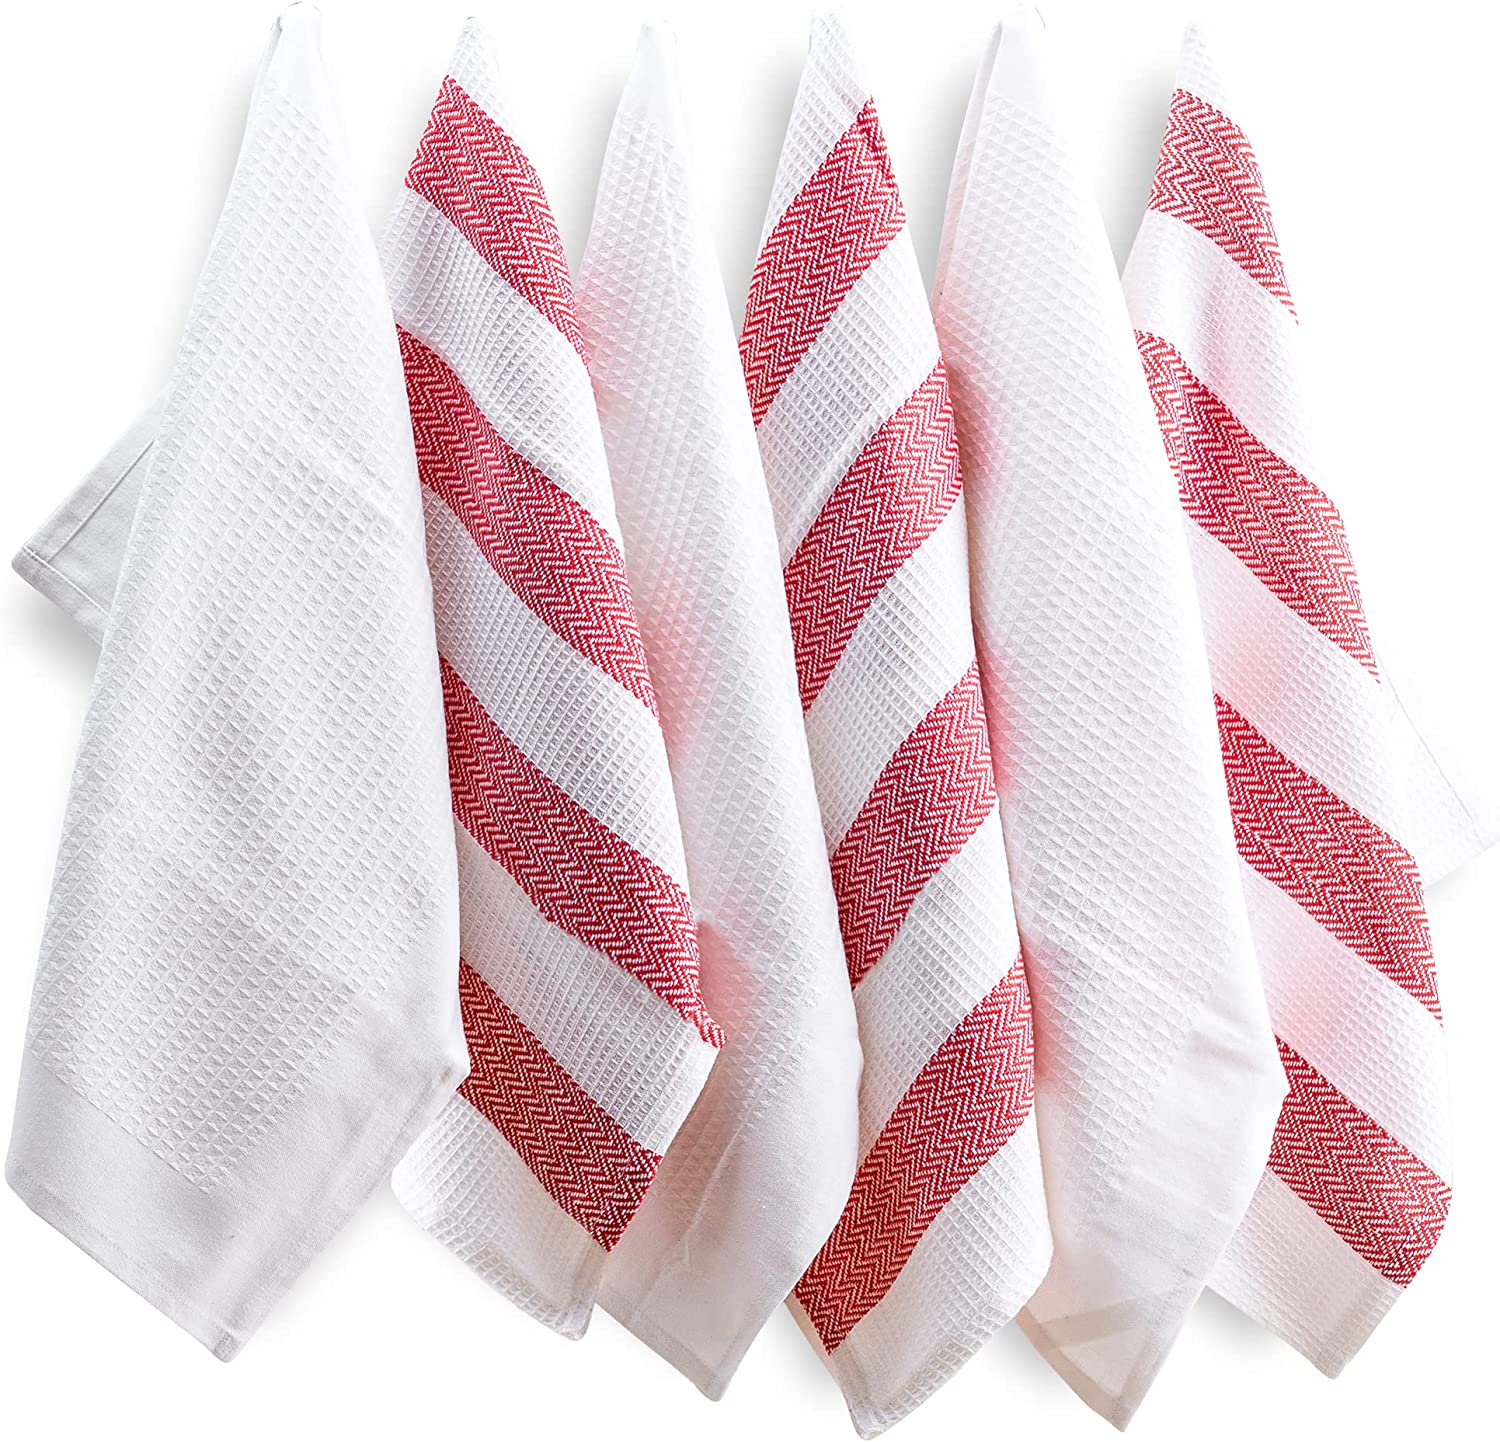 Kitchen wash cloths with striped are absorbent dish towels, decorative kitchen towels, tea towels for kitchen.